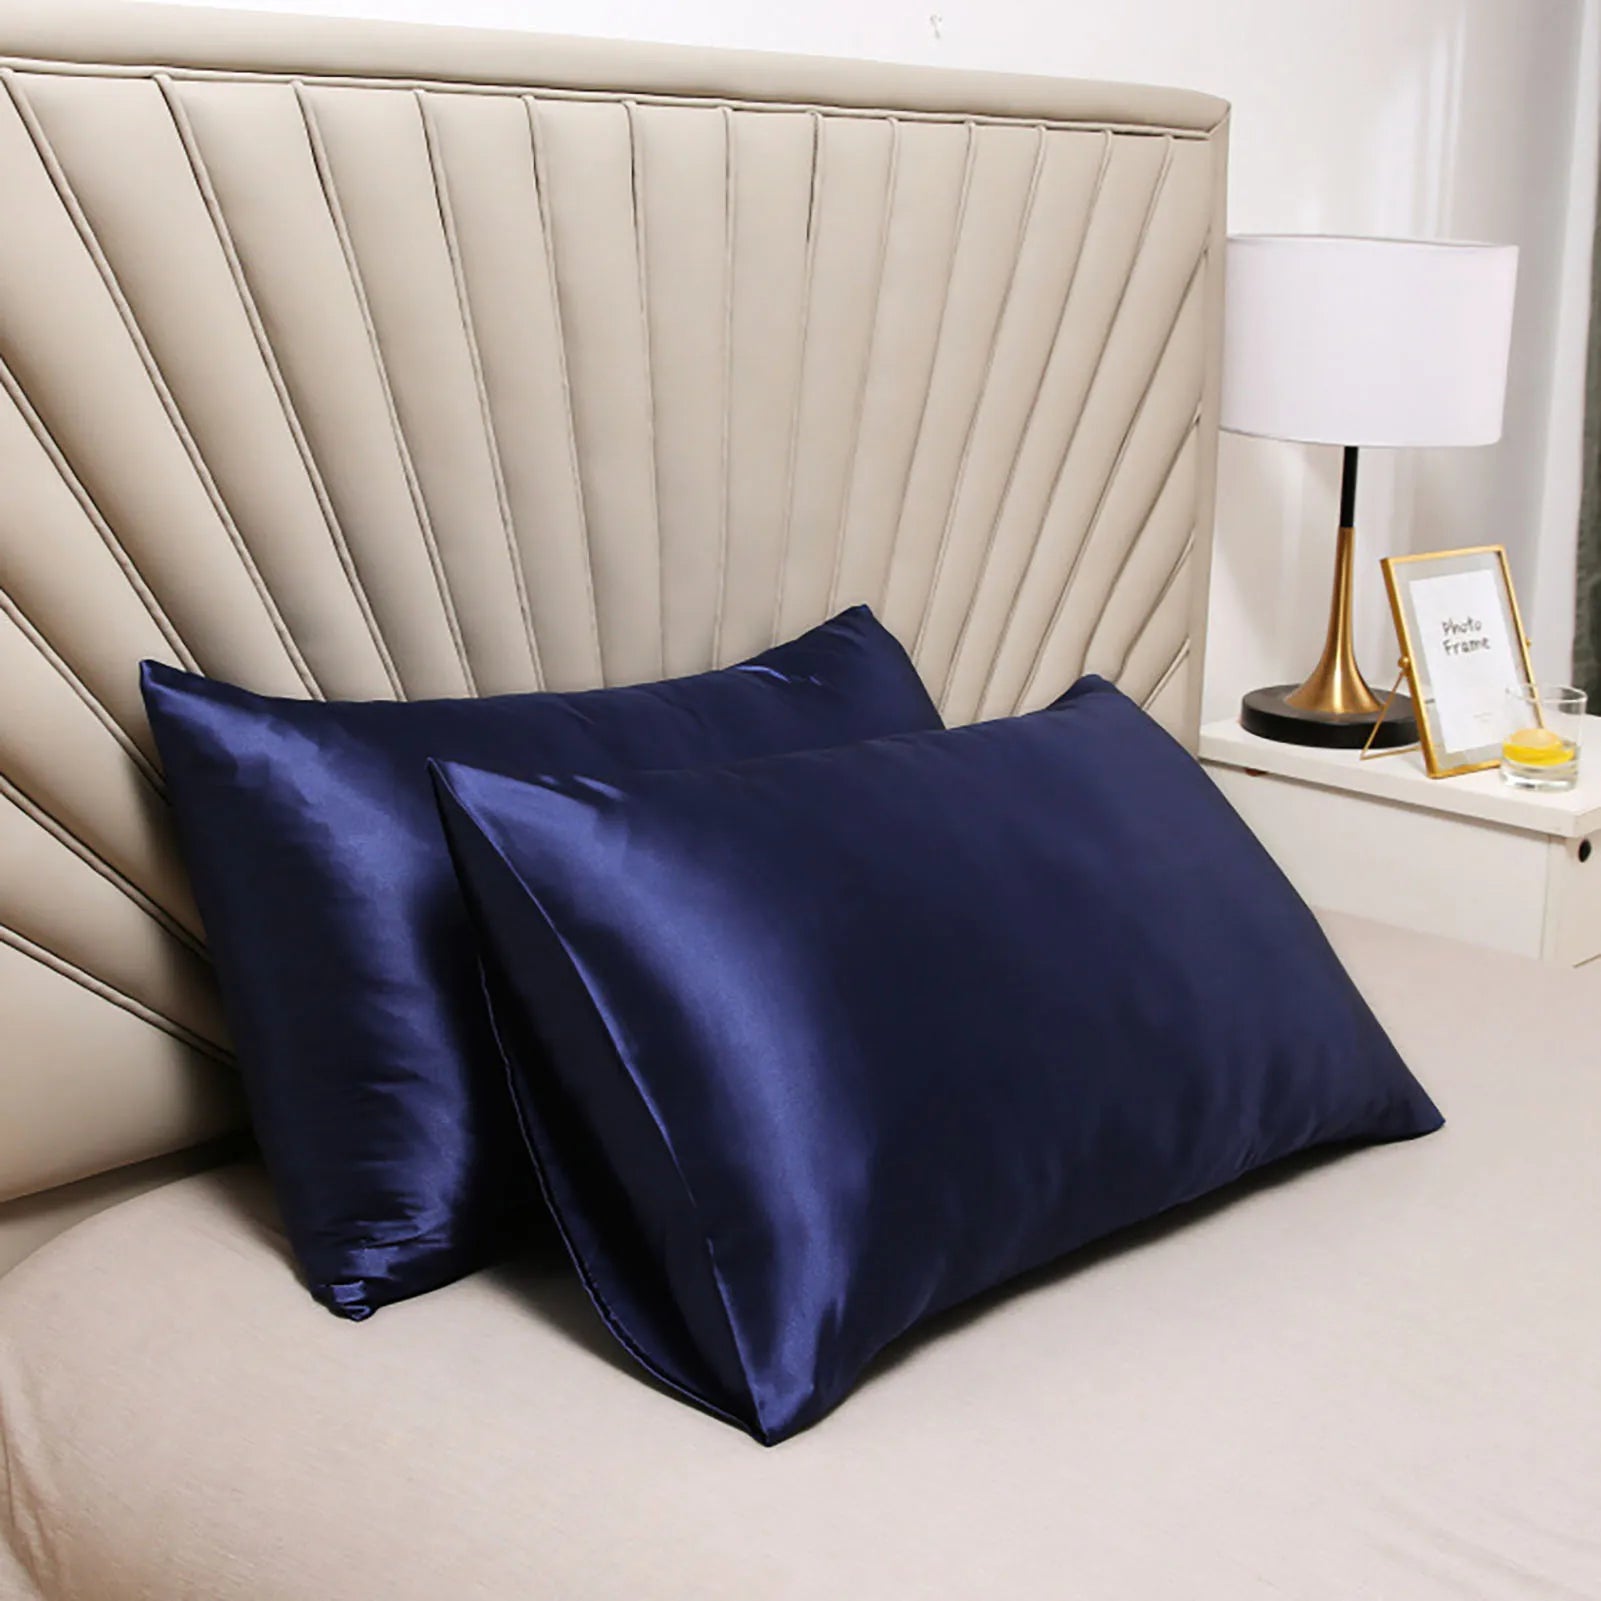 Simulation Ice Silk Satin Pillowcase Satin Cooling Pillow Covers Suitable for Bedroom Summer Use